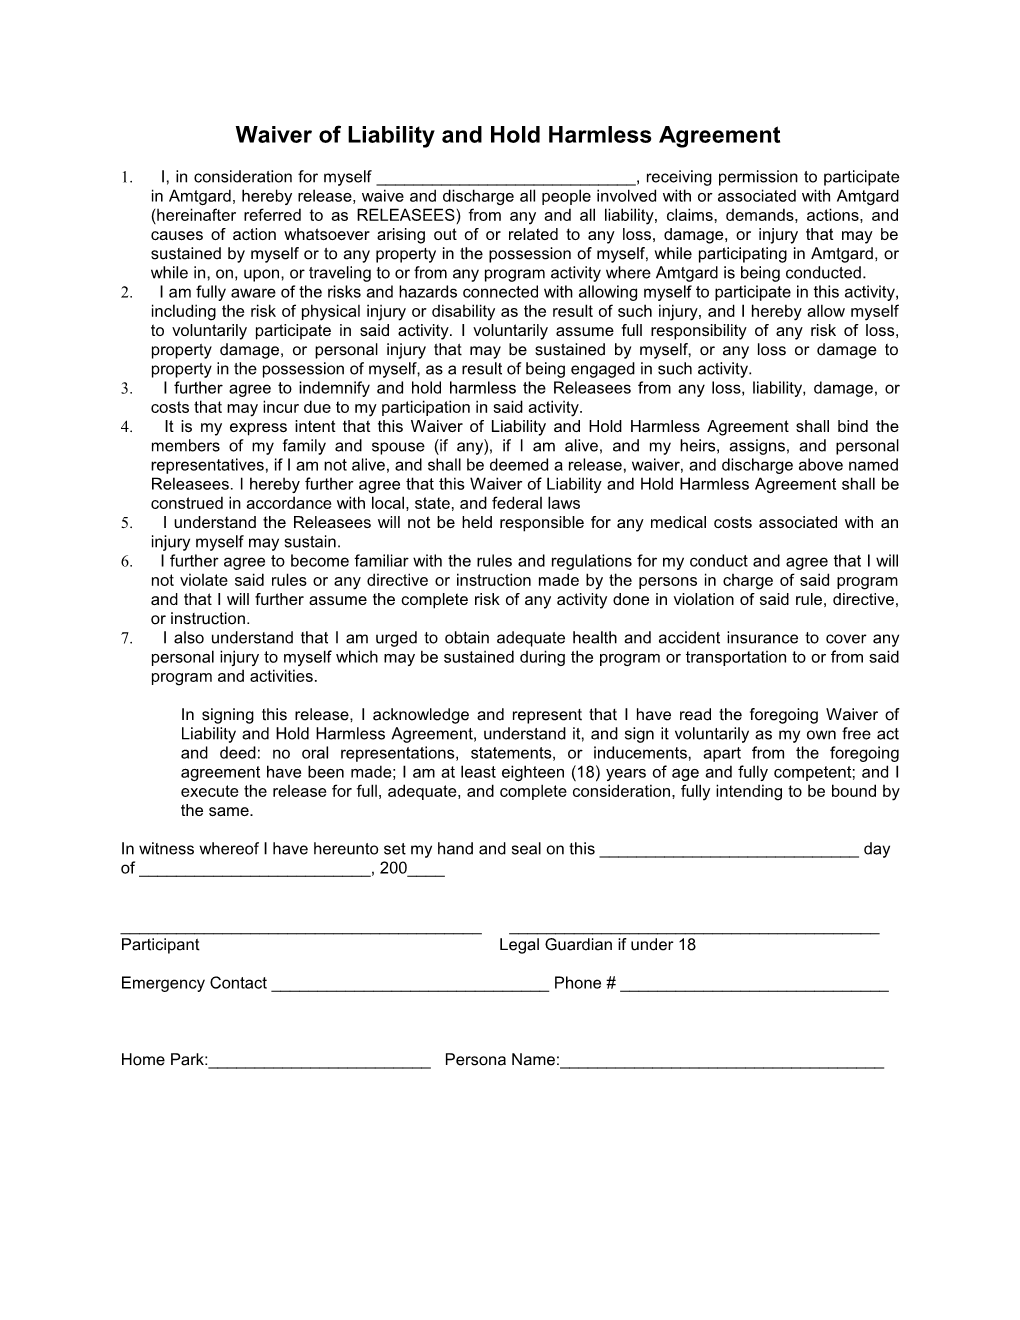 Waiver of Liability and Hold Harmless Agreement s1